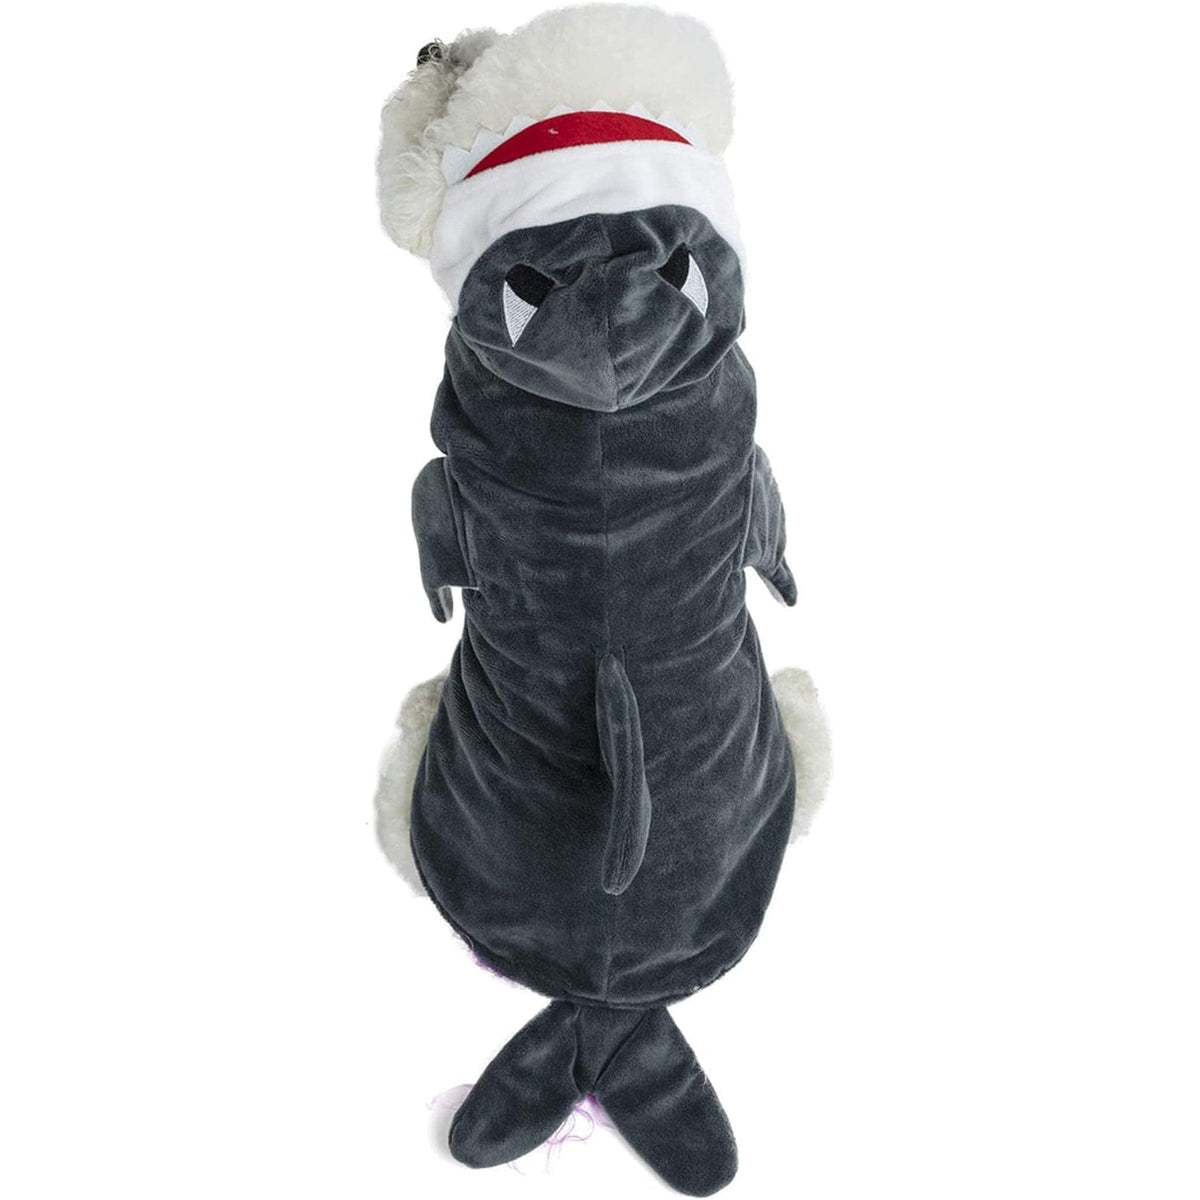 🐶 Funny Shark Onesie Dog Cosplay Outfit 🦈 Grey / 9.4"Neck Girth, 13.0"Chest Pets Paradise Pet Supplies